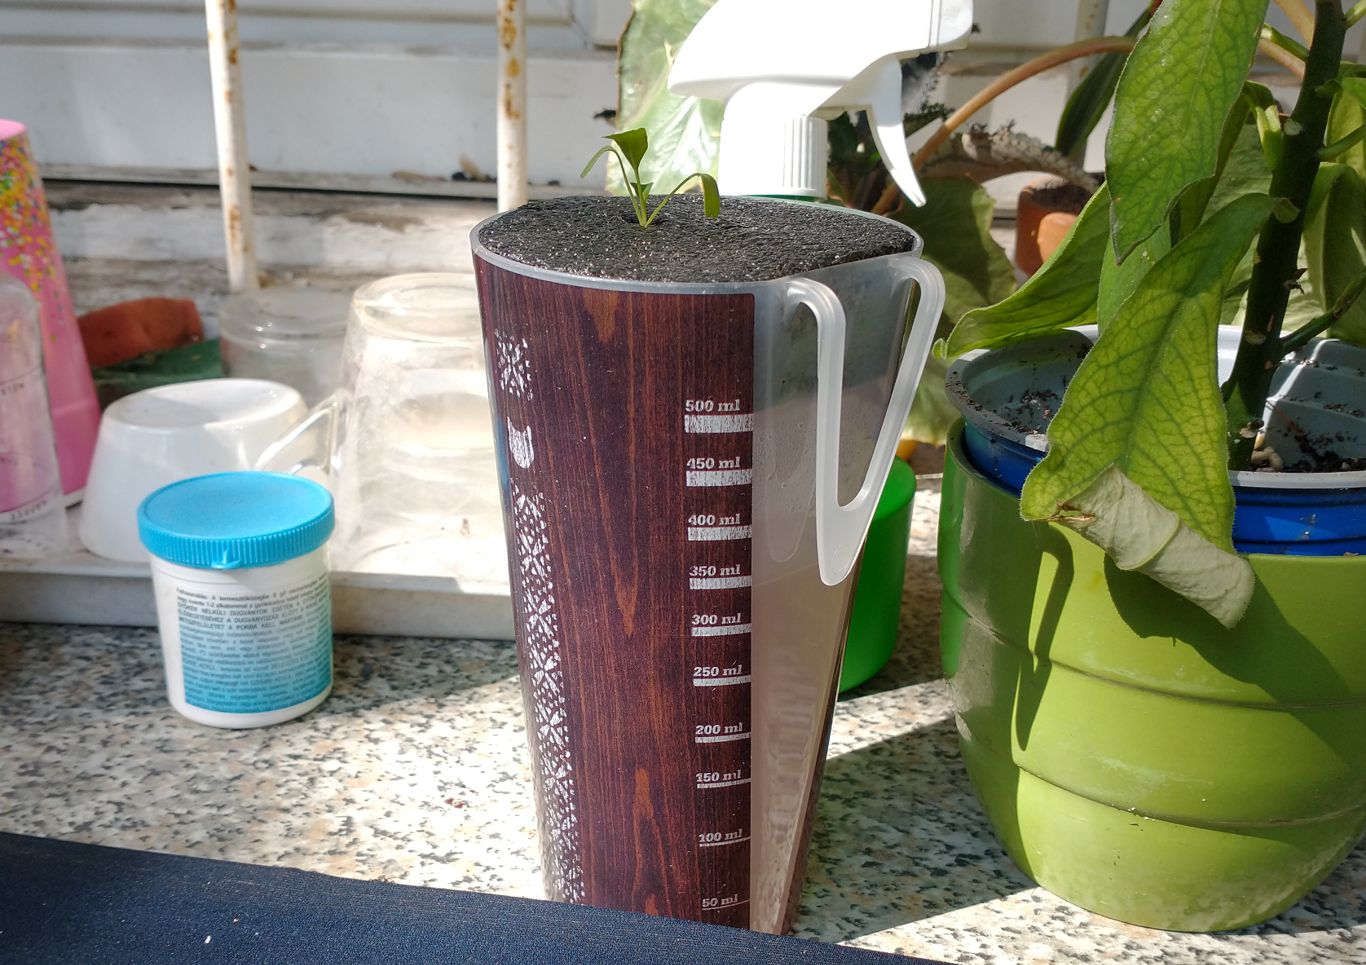 A rosemary plant in a half liter Kratky cup.